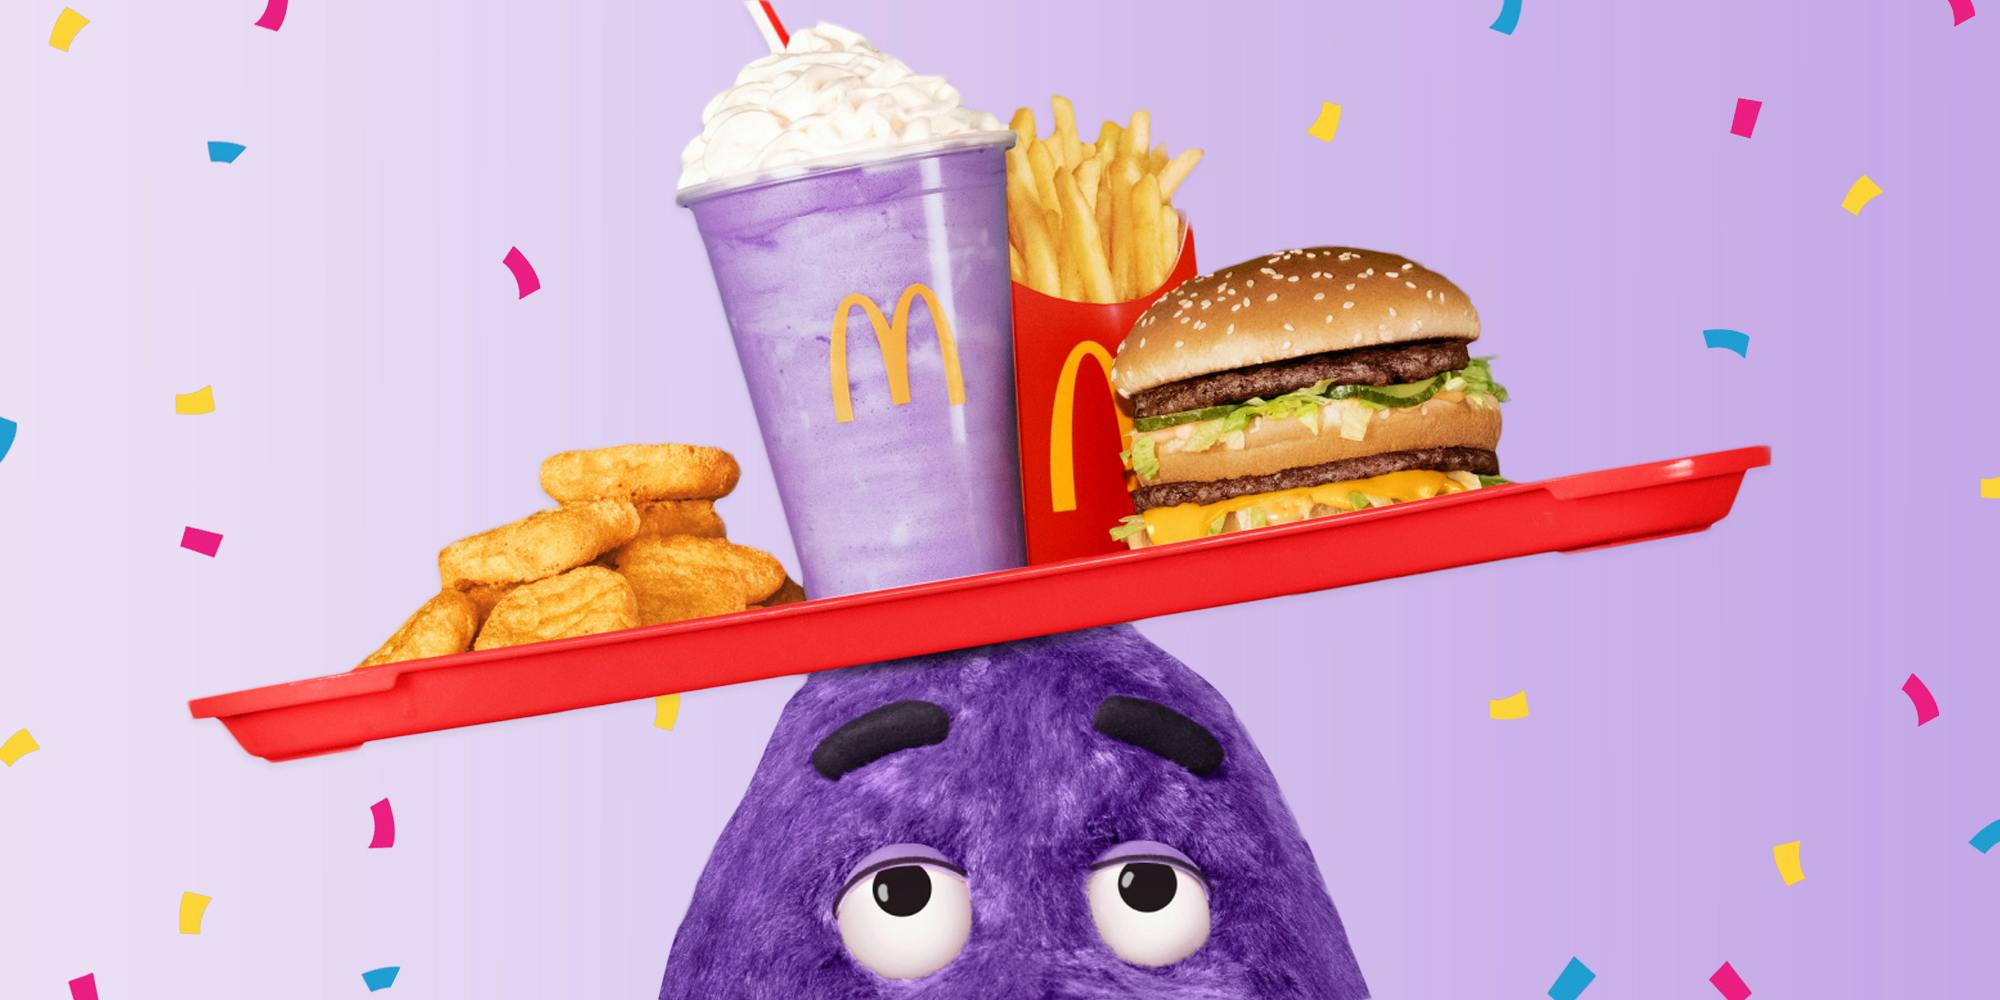 The Grimace Birthday Shake 💜, Gallery posted by Mary ✨